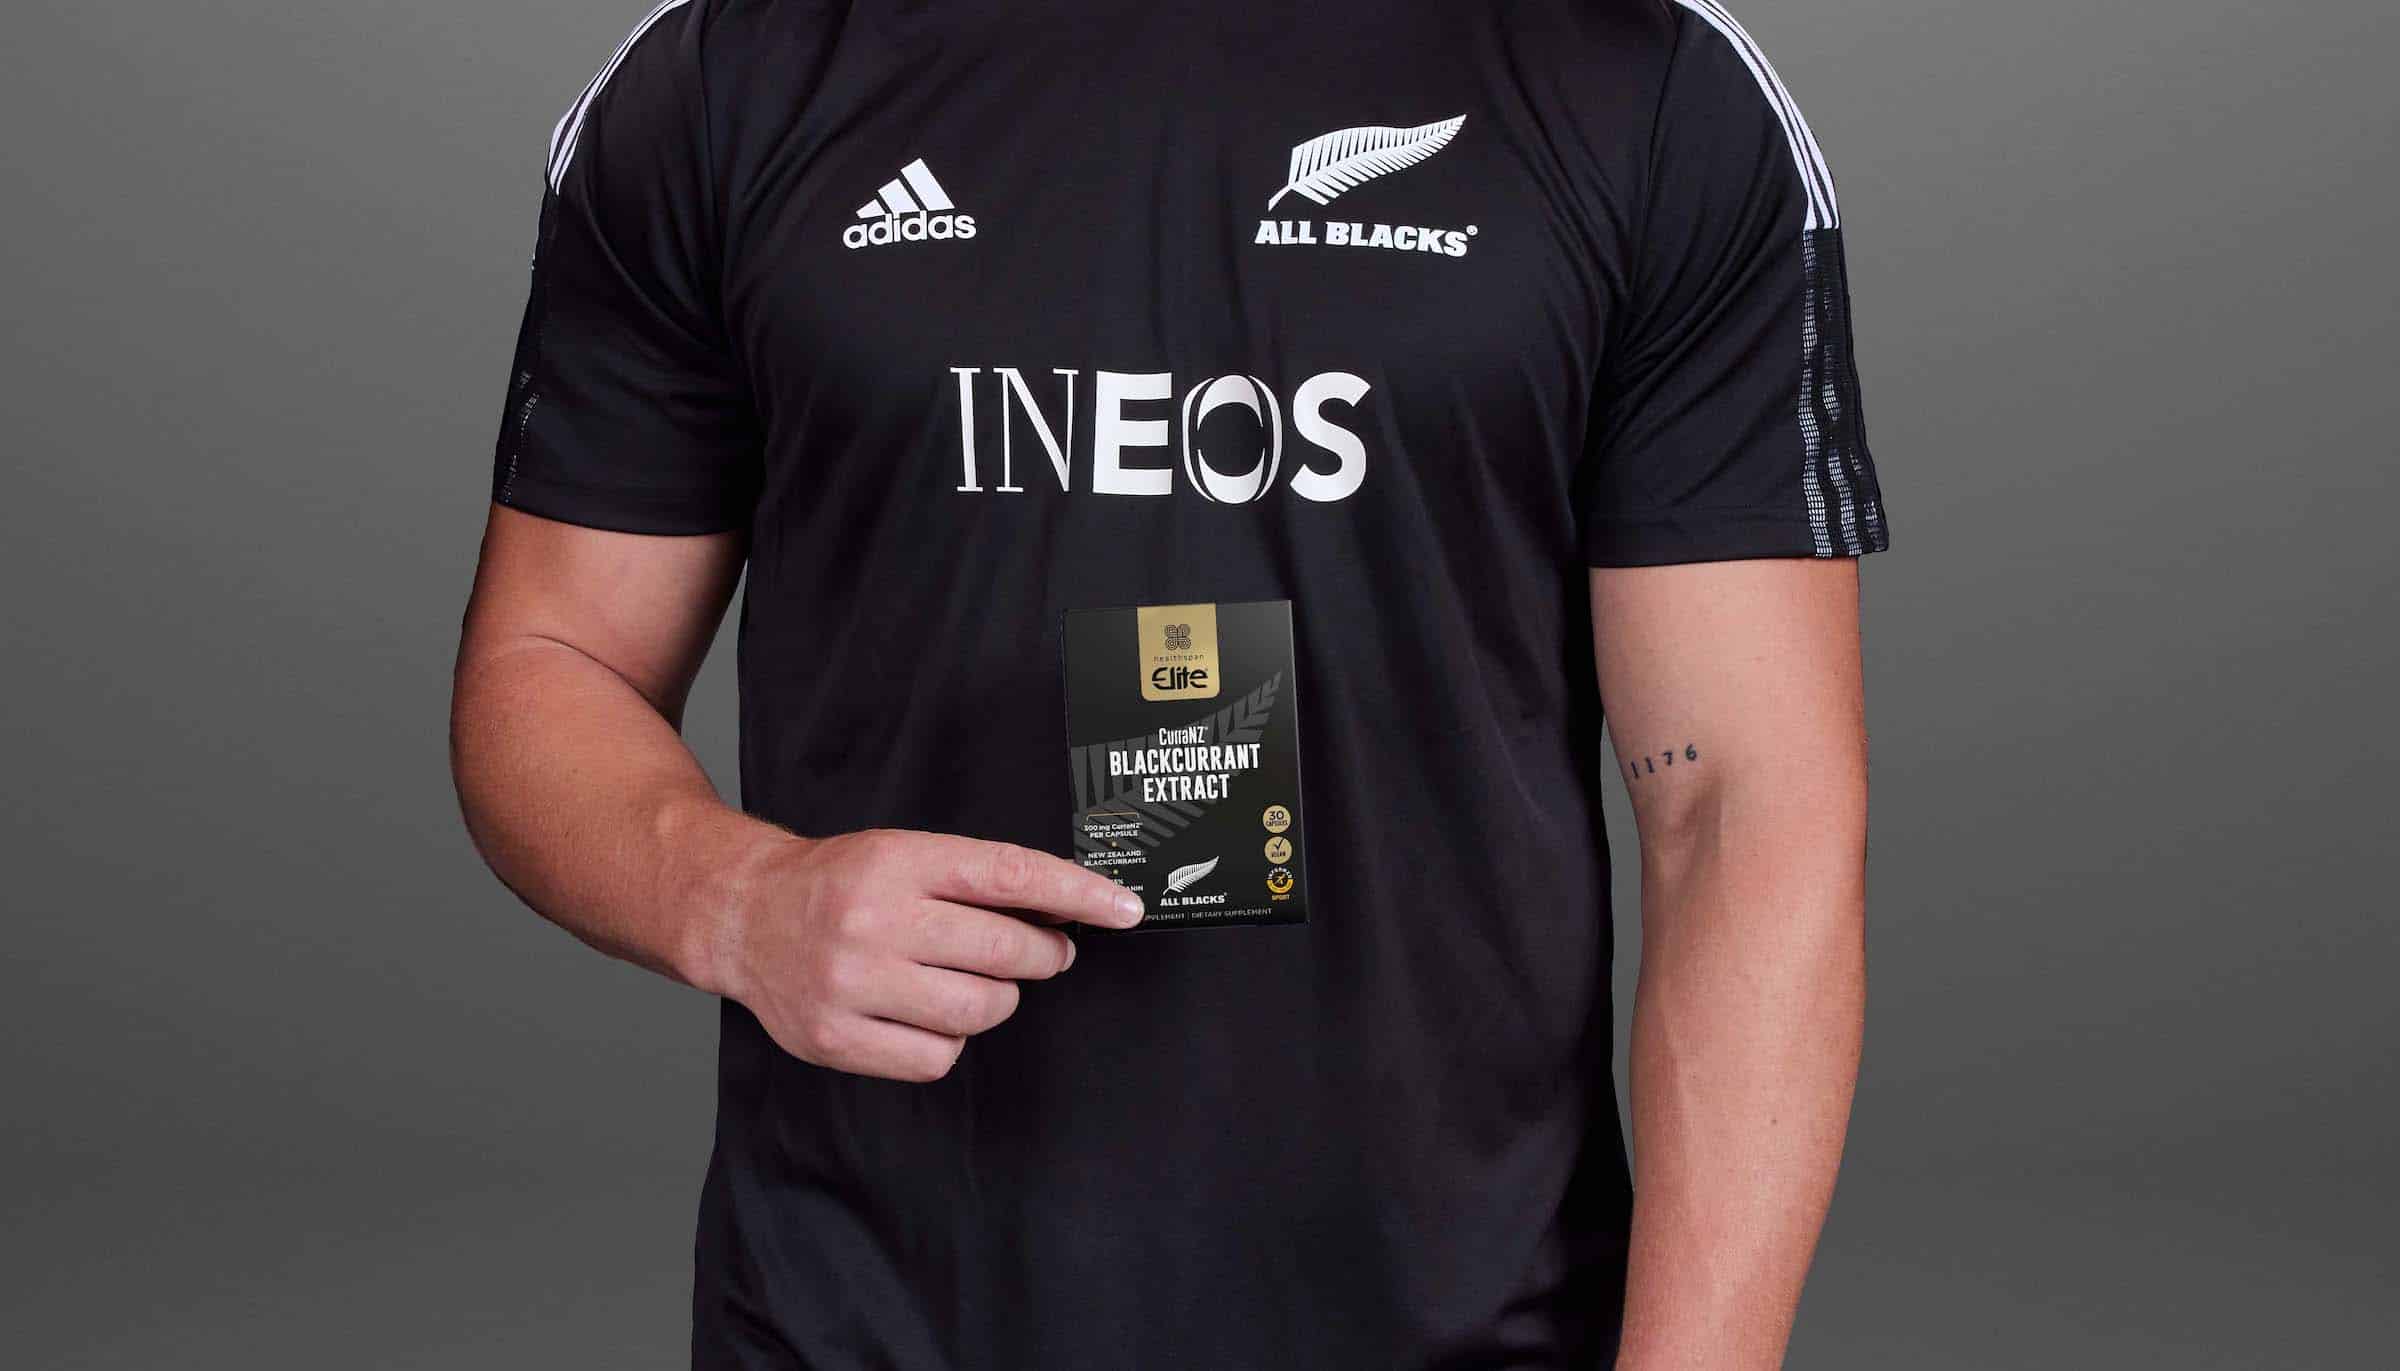 Healthspan Elite Launches Official All Blacks Supplement Using Award-Winning Curranz Blackcurrant Extract